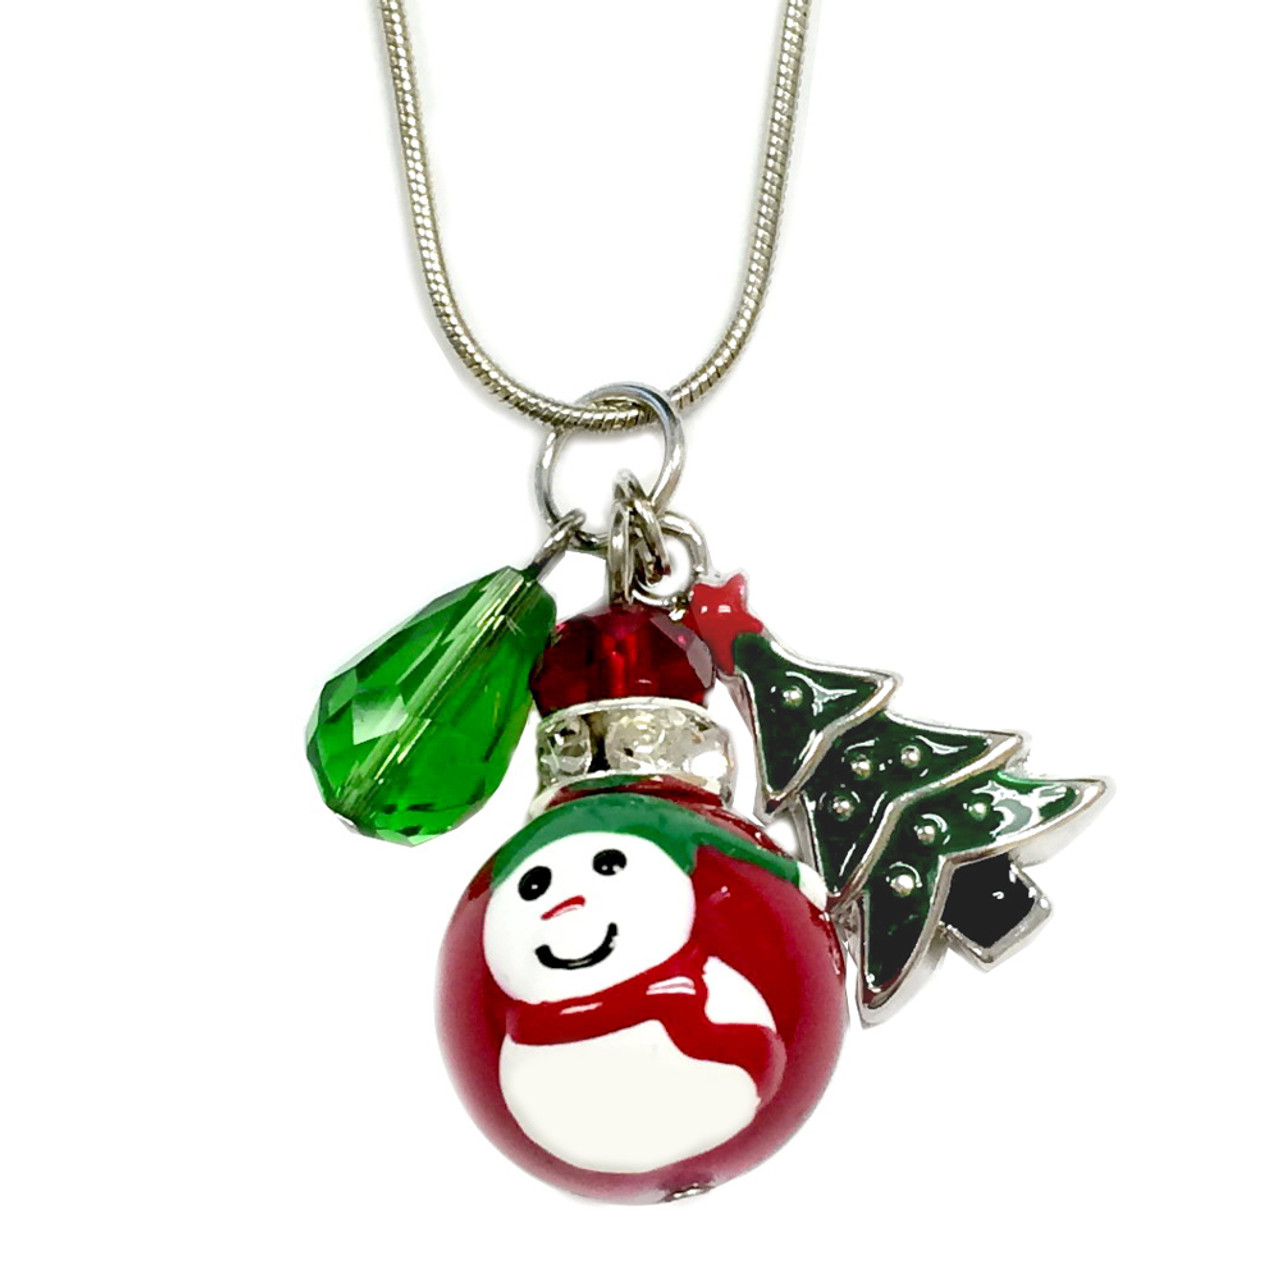 Red Snowman and Christmas Tree Charm Necklace - Pendant Necklace - Christmas  Necklace - Christmas Jewelry Gift - NE3091B - FIONA ACCESSORIES